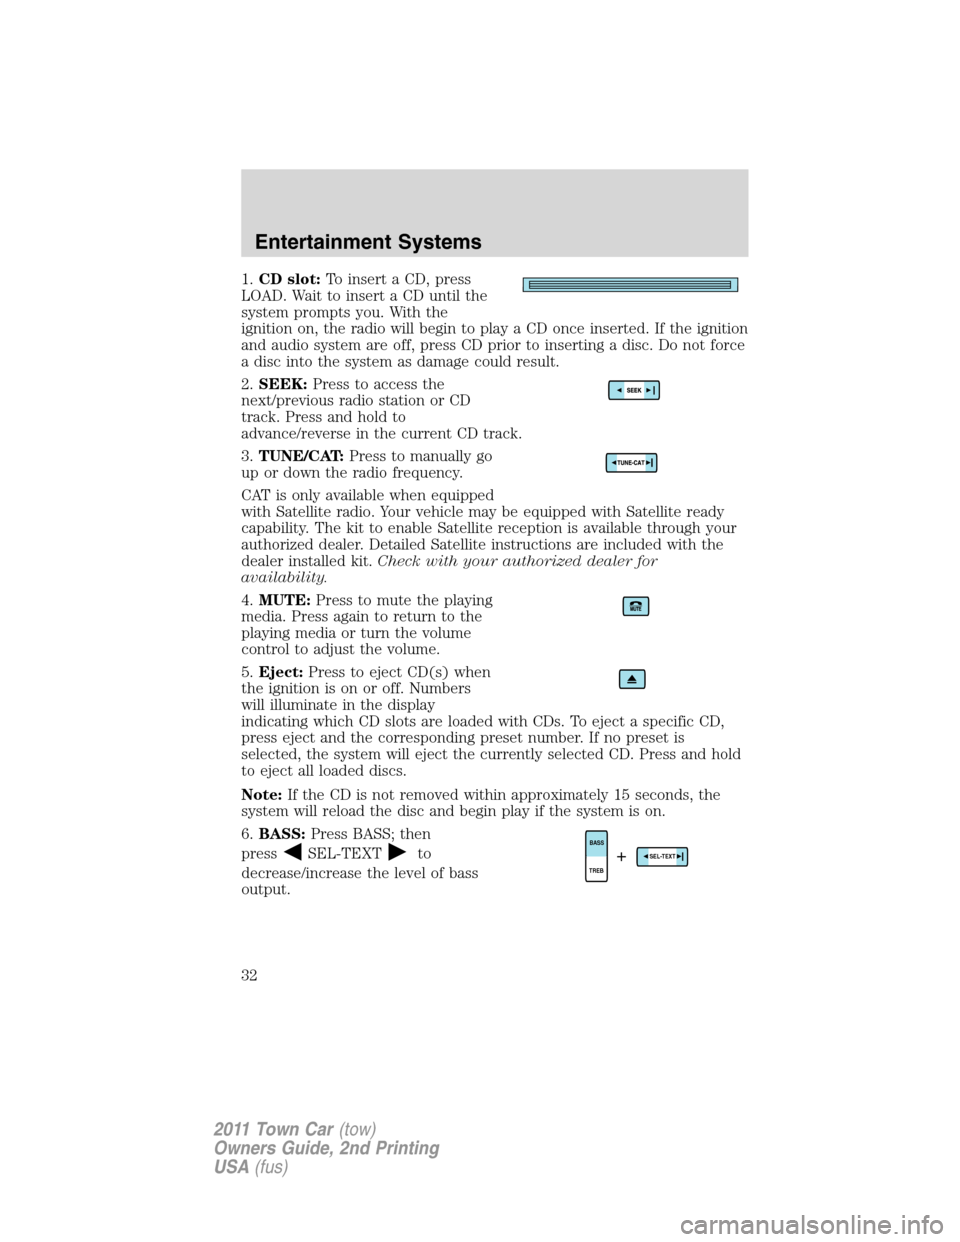 LINCOLN TOWN CAR 2011  Owners Manual 1.CD slot:To insert a CD, press
LOAD. Wait to insert a CD until the
system prompts you. With the
ignition on, the radio will begin to play a CD once inserted. If the ignition
and audio system are off,